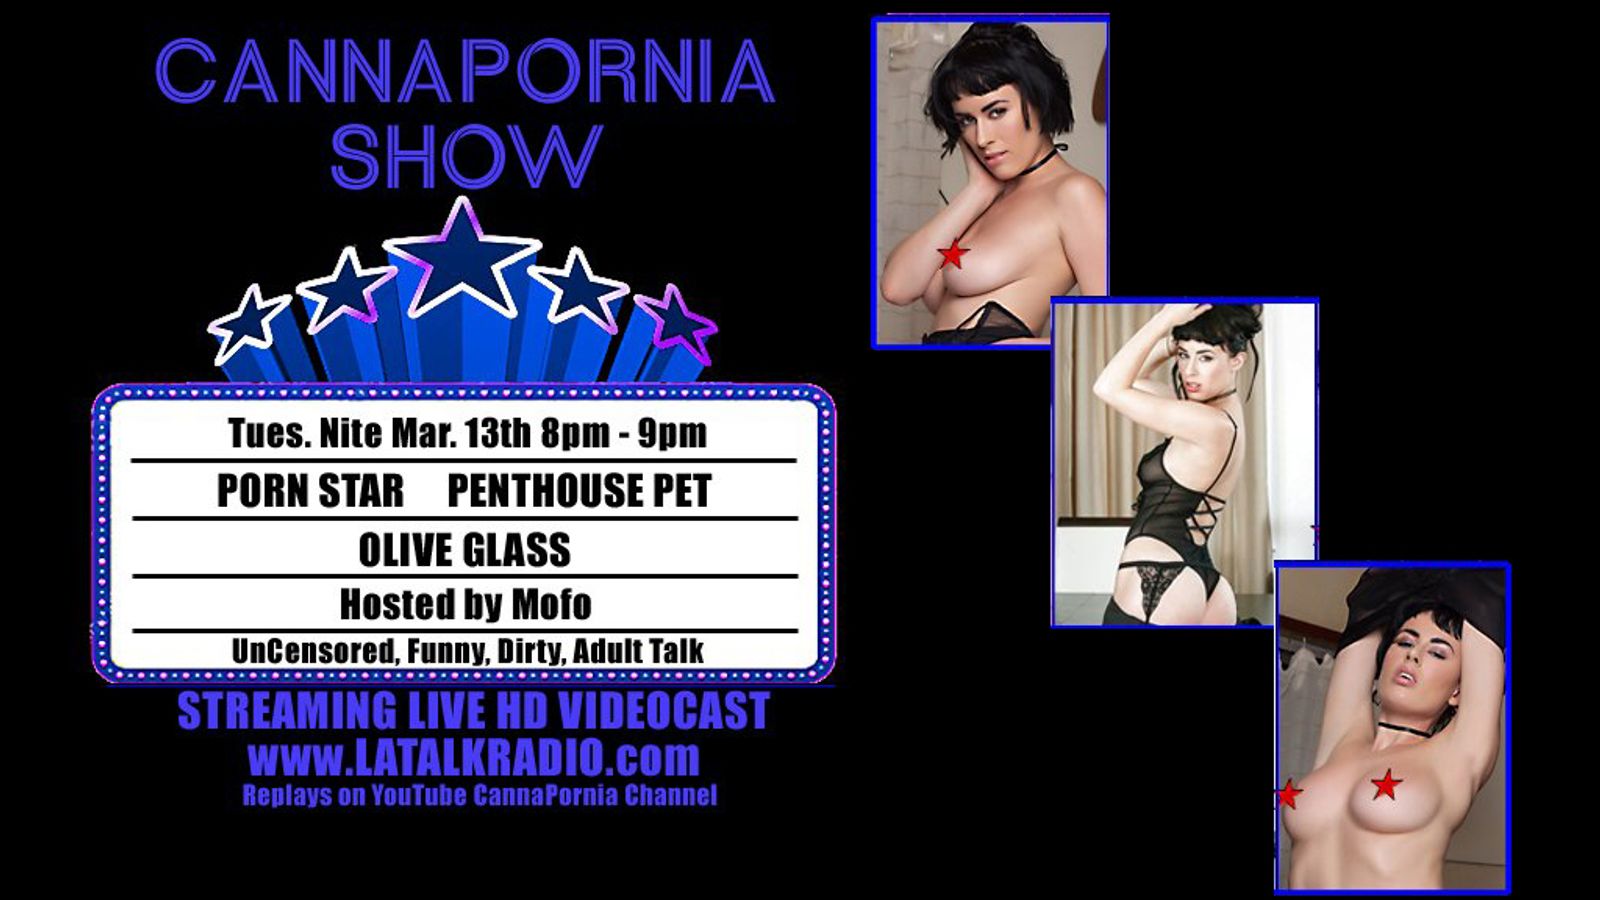 Tonight's CannaPornia Show Will Feature Starlet Olive Glass